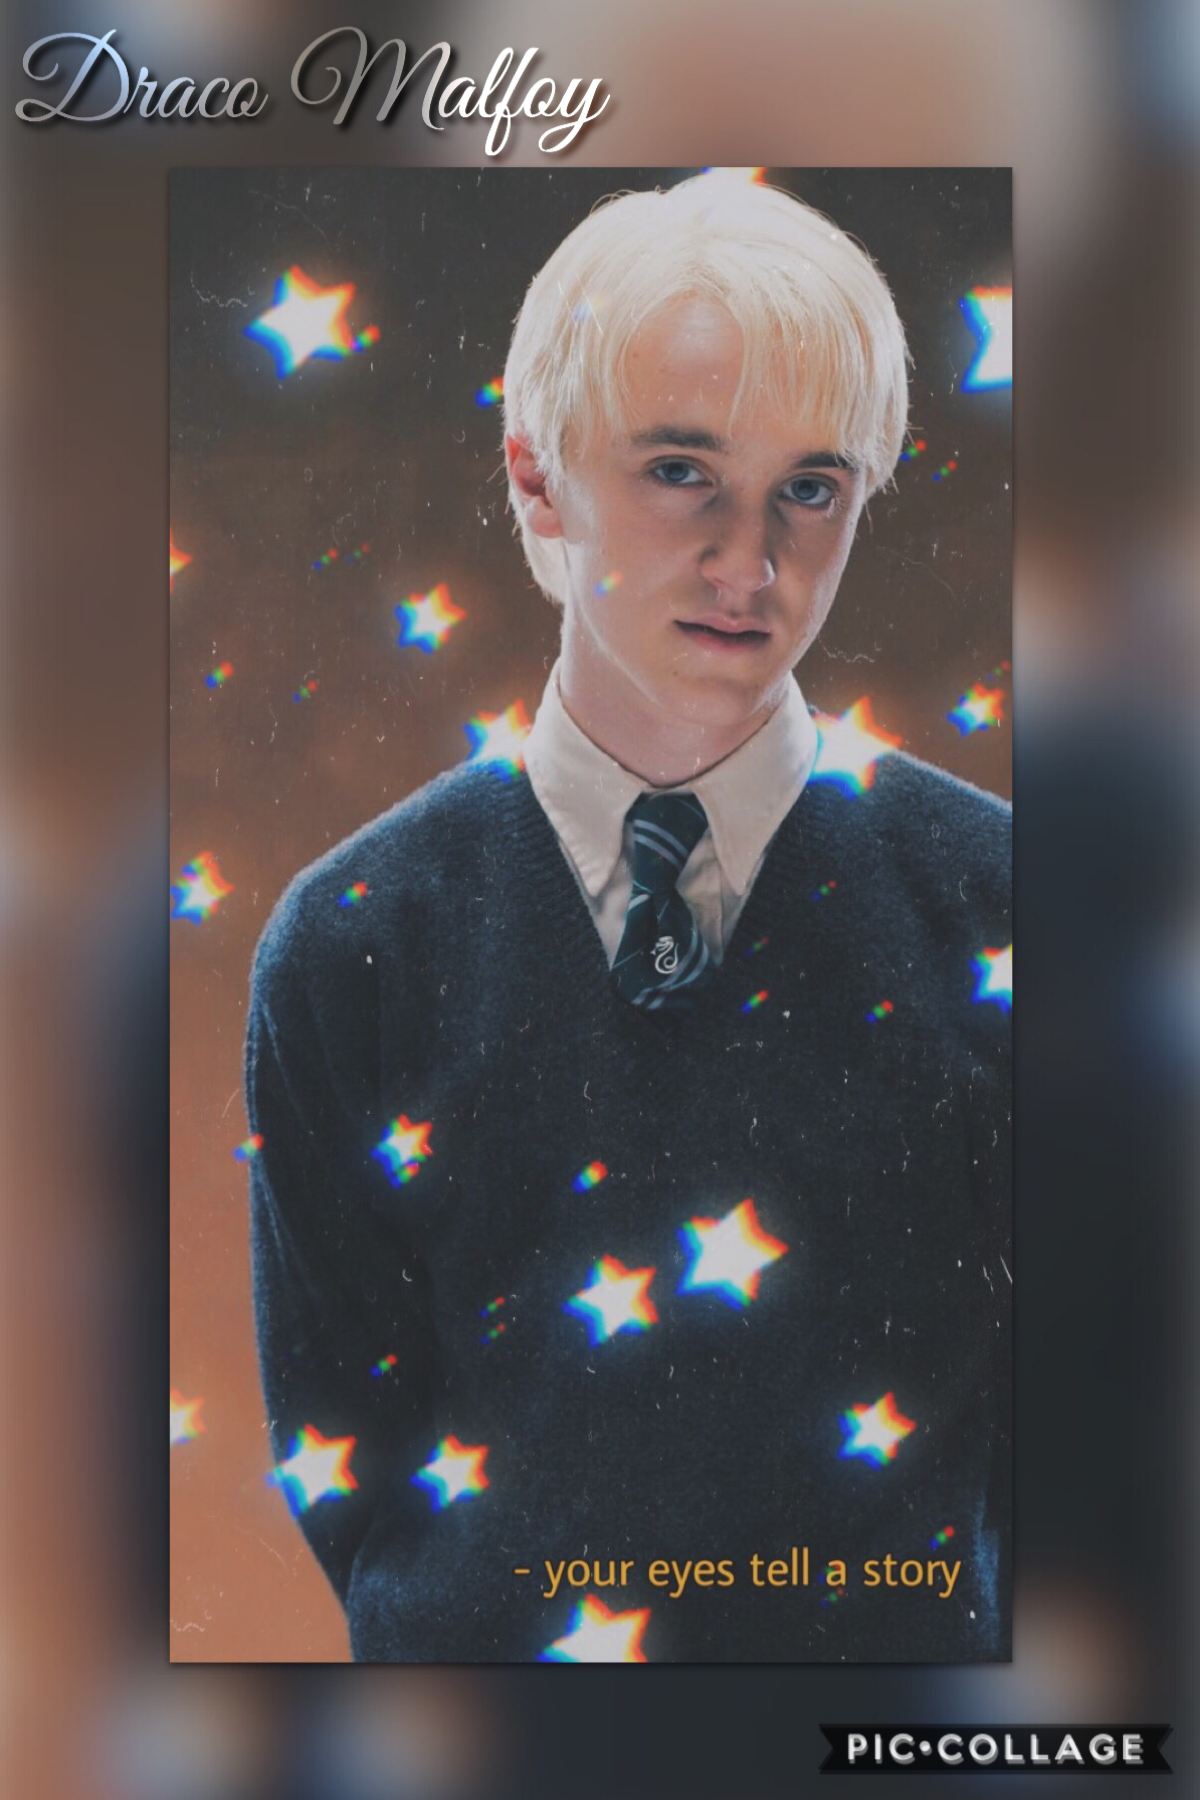 This concludes Draco Malfoy week. This week will be completely different lol.